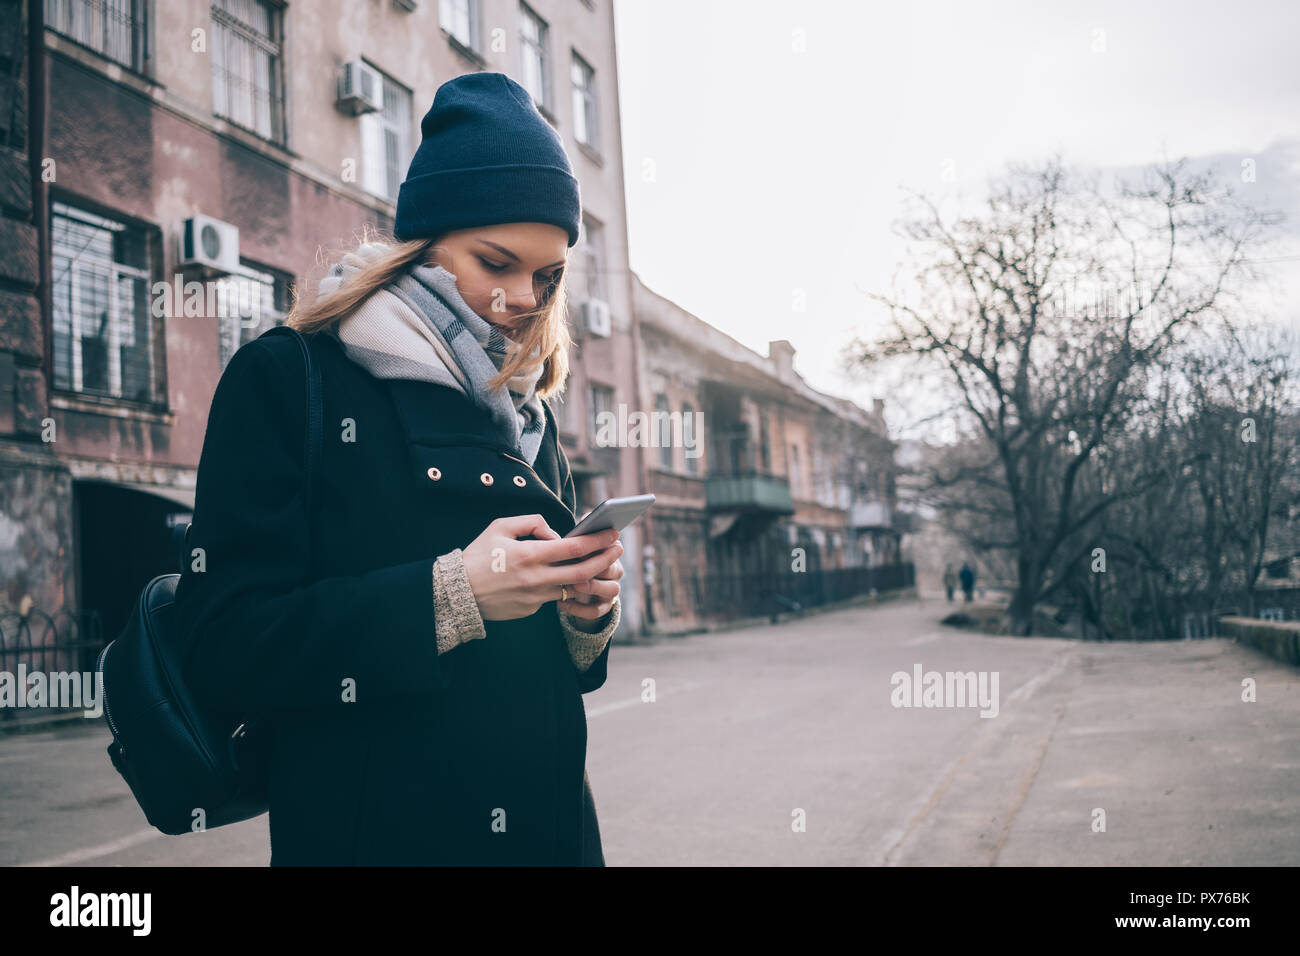 Female looking at mobile device on winter street. Young caucasian woman wearing wool coat, scarf and hat using smart phone in city. Stock Photo